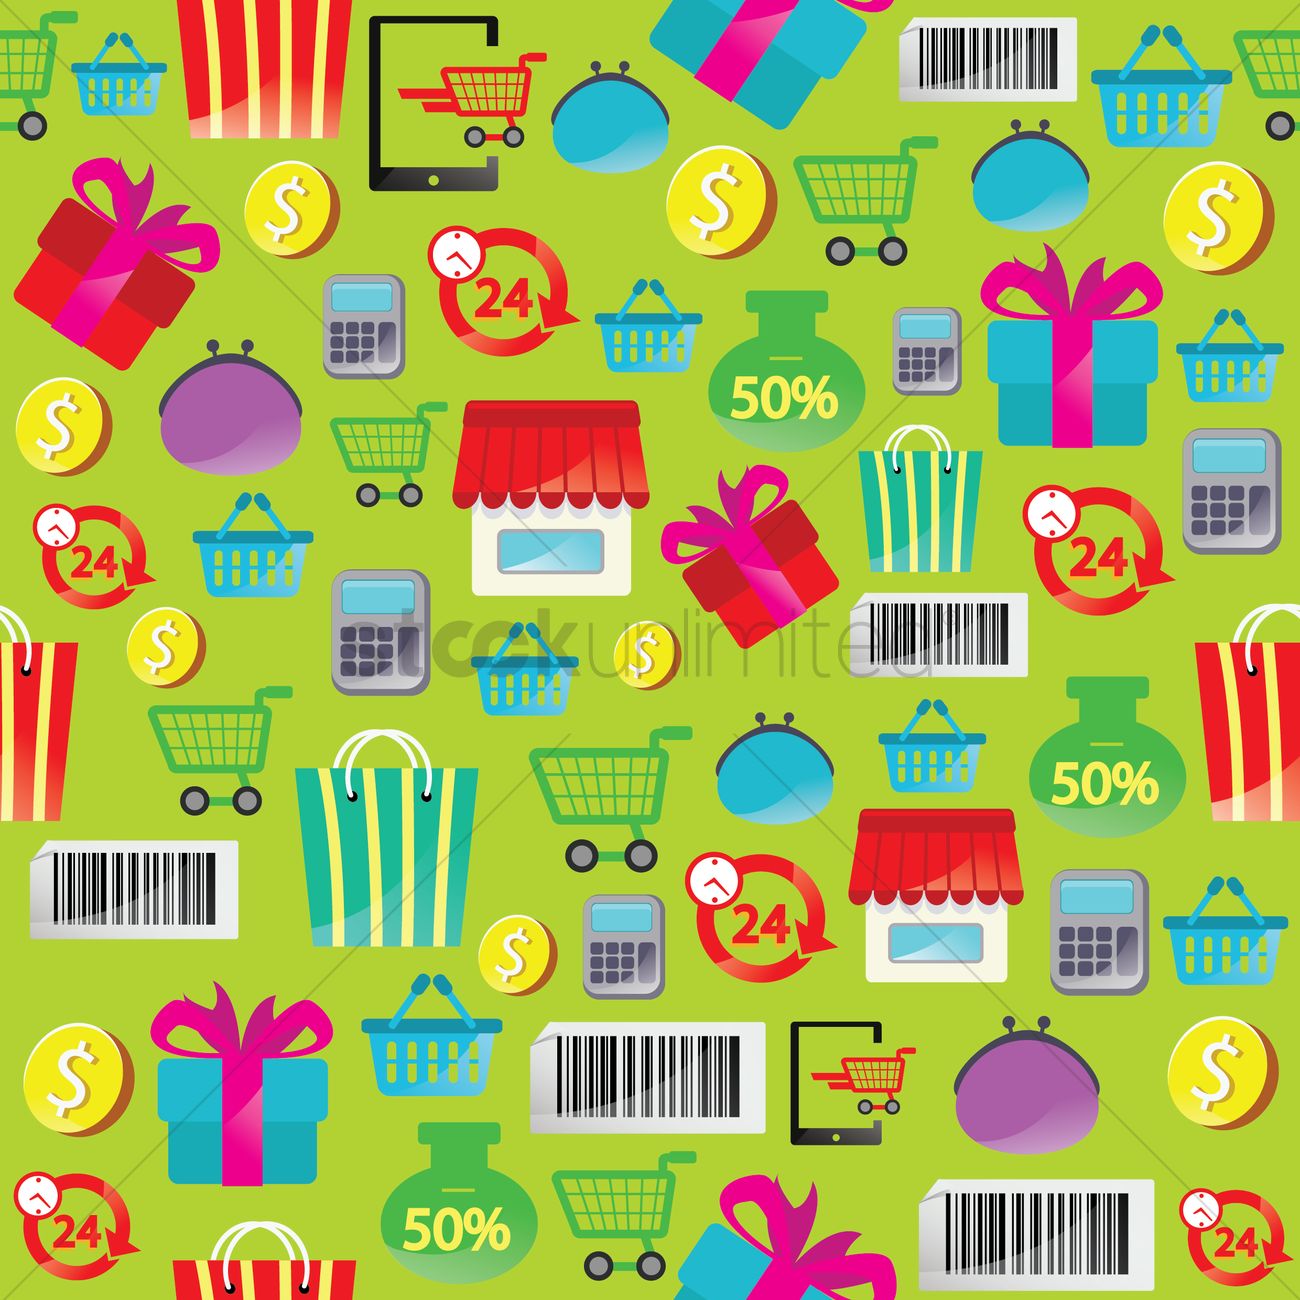 Online Shopping Theme Background Vector Image